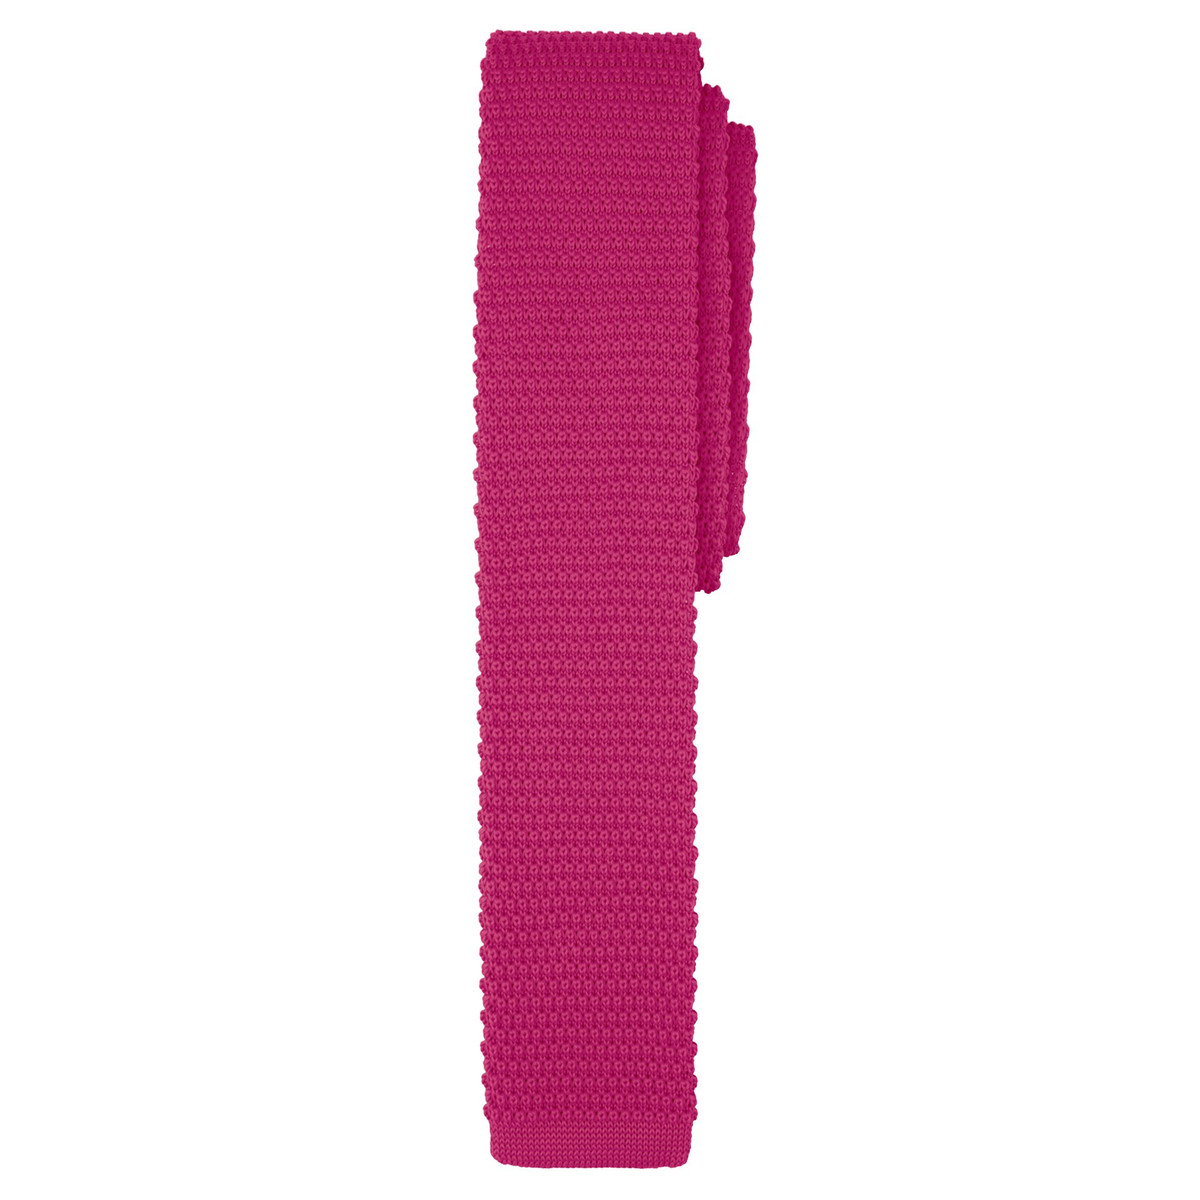 Boys' Prep Solid Color Knitted Self-Tie Regular Neck Tie - Fuchsia Pink